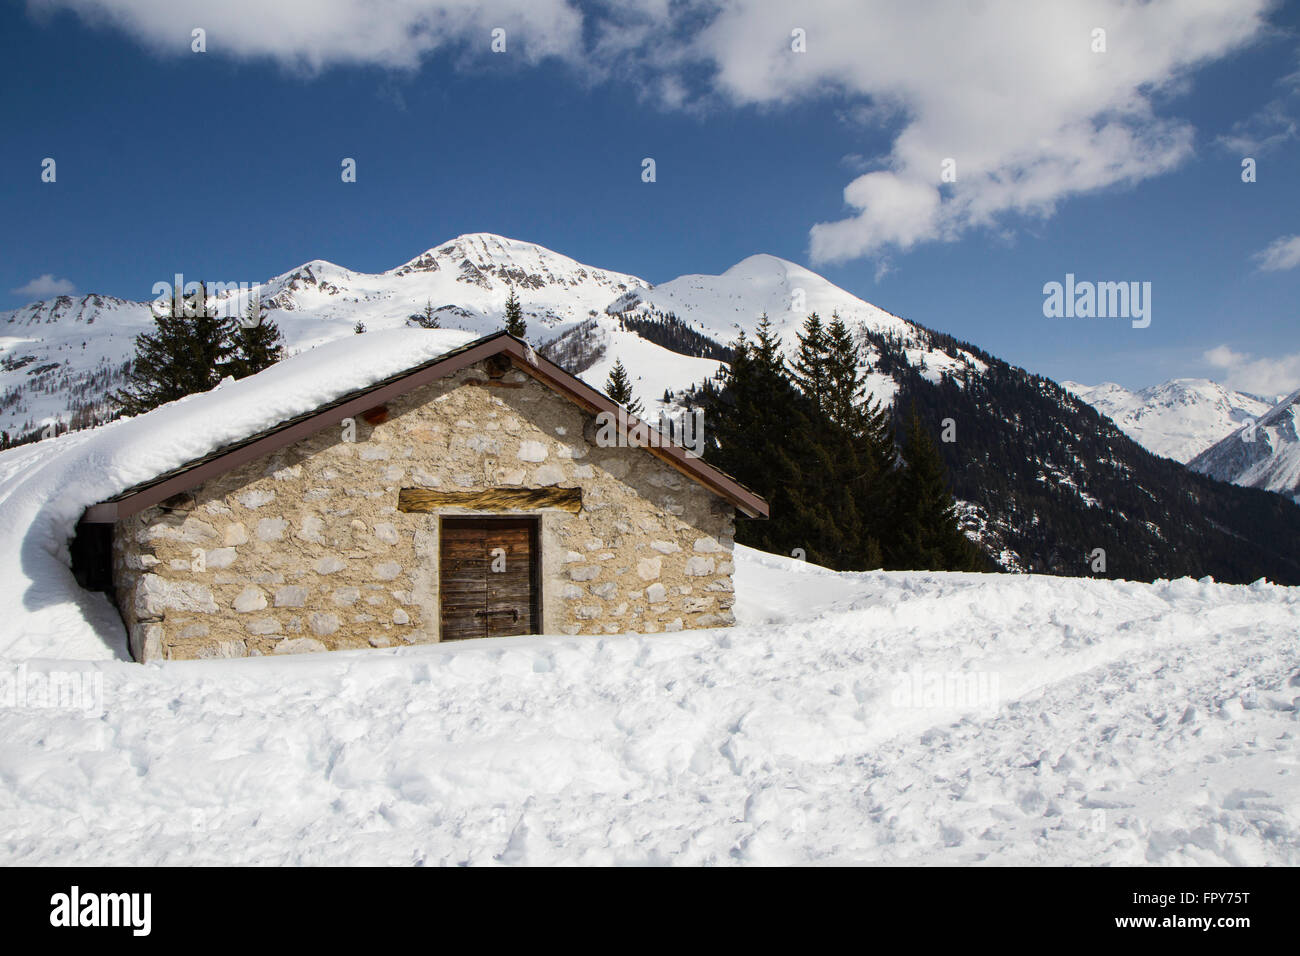 mountain panorama with hut covered in snow, blue sky Stock Photo